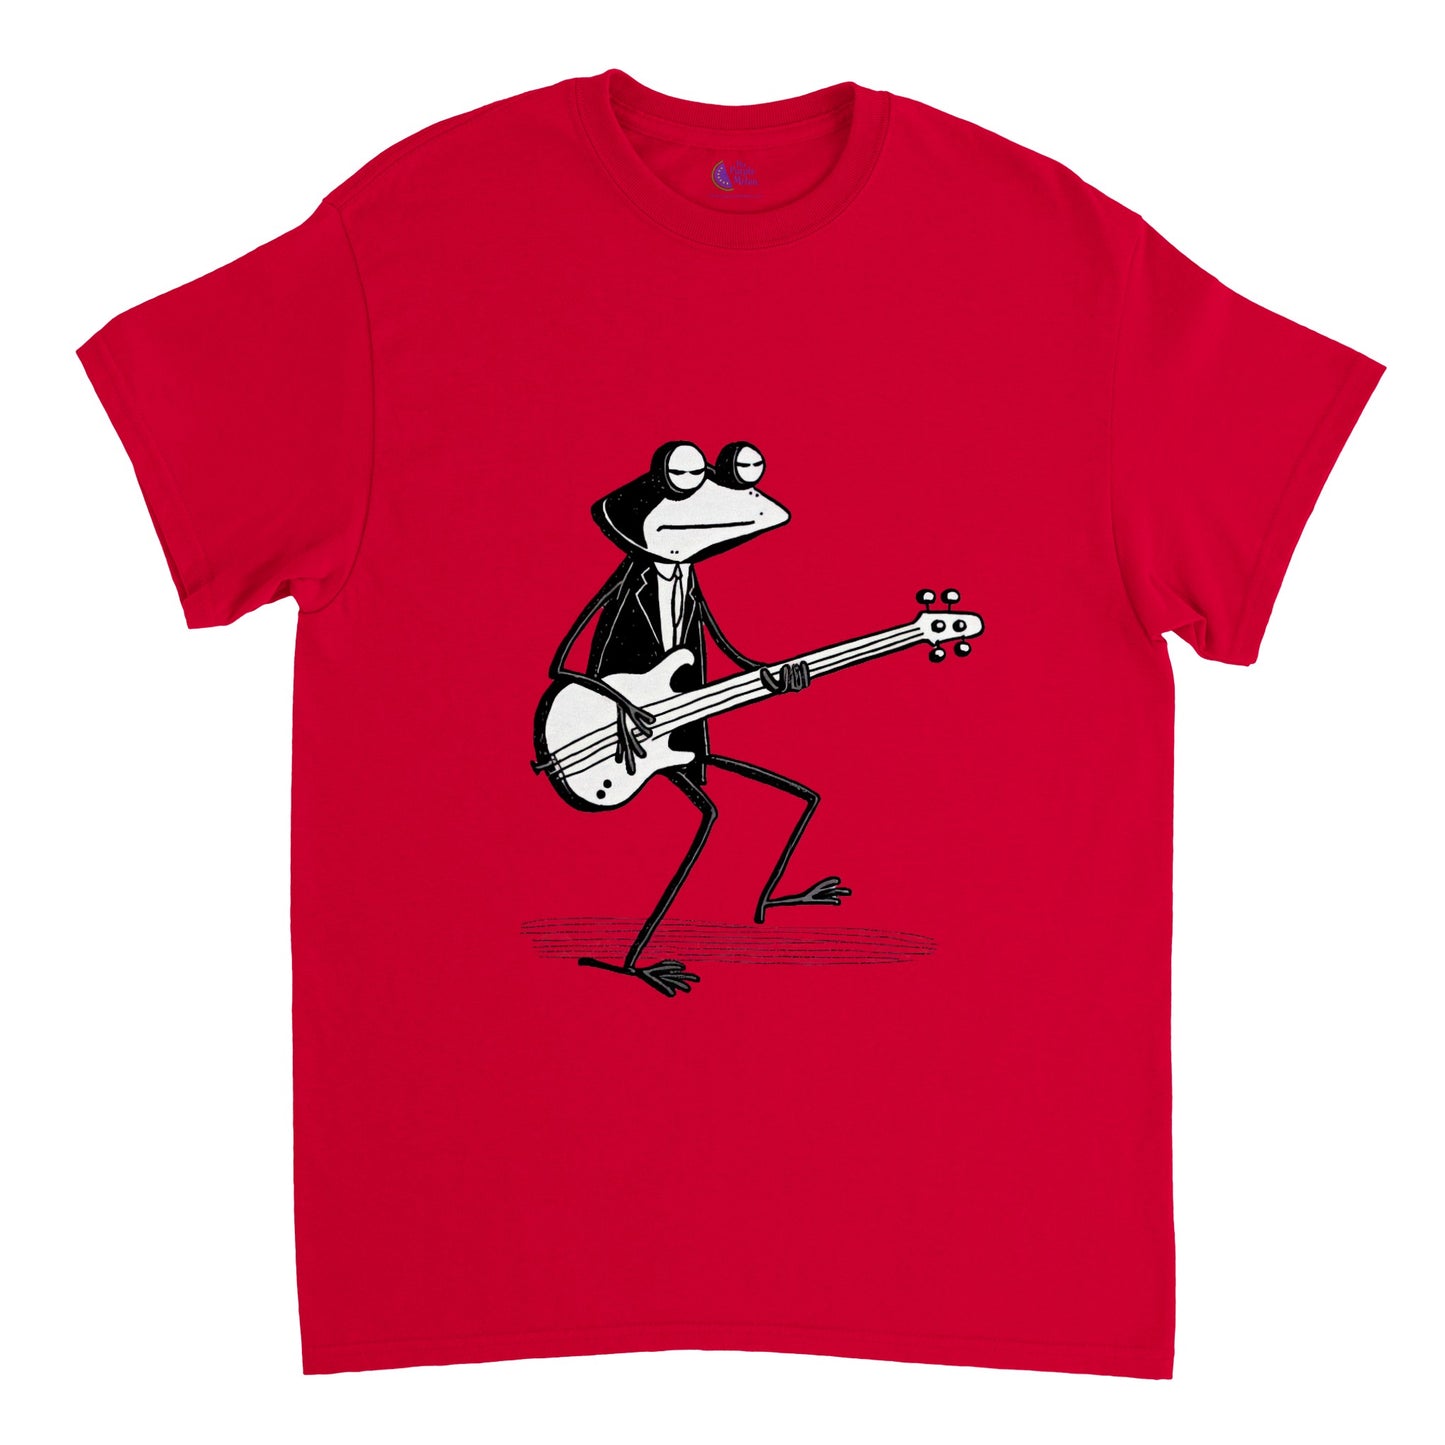 Red t-shirt with a frog playing a bass guitar print